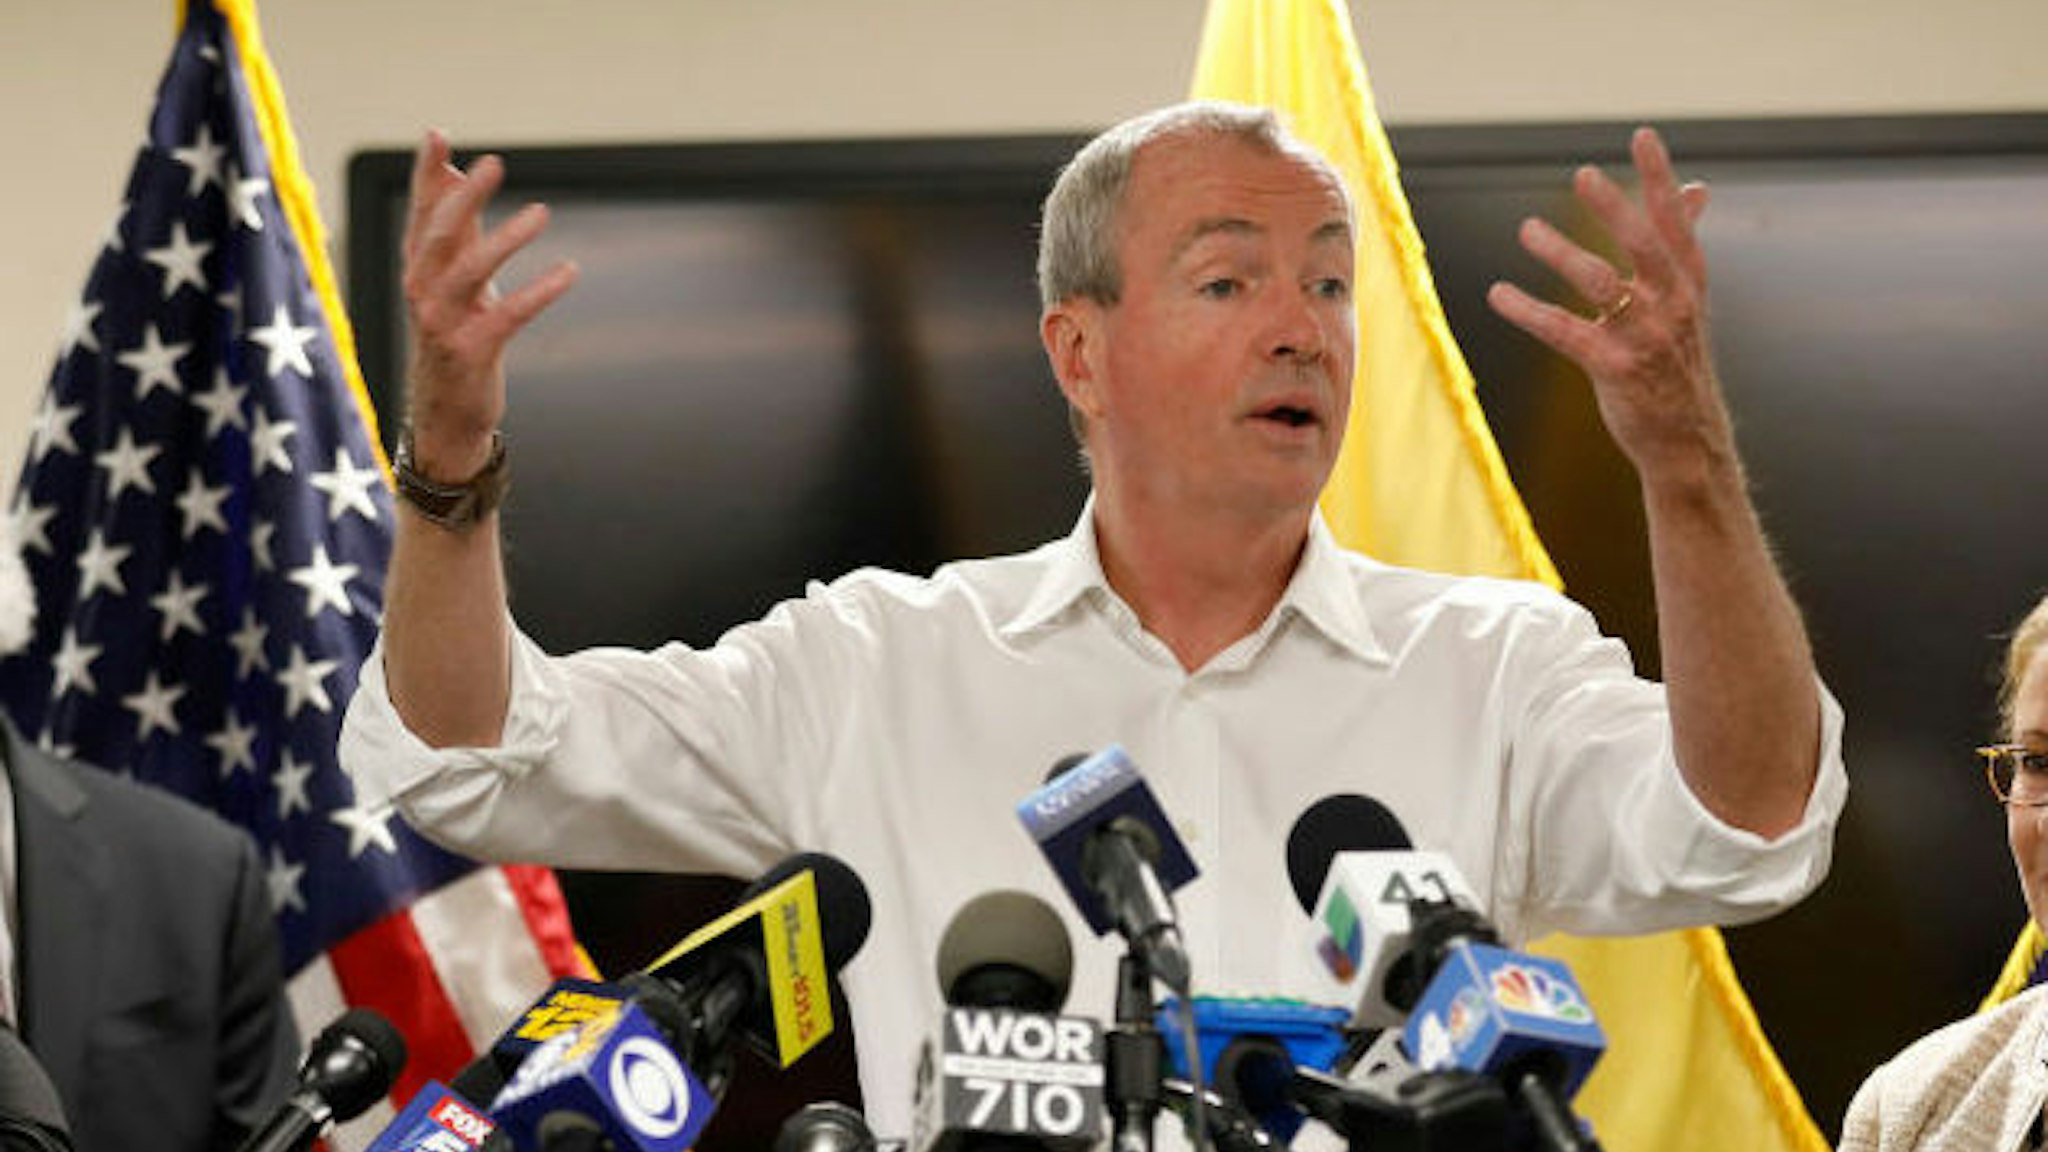 New Jersey Governor Phil Murphy speaks about Newark's ongoing water crisis during a press conference held at the Newark Health Department on August 14, 2019 in Newark, New Jersey. The city recently began distributing bottled water to residents affected by tap water that's been contaminated with lead in certain areas of the city. At left are Newark Mayor Ras Baraka and Kareem Addem, acting director of Water and Sewer Utilities in Newark. At right is Judy Persichilli, acting Judy Persichilli as Commissioner of the New Jersey Department of Health. (Photo by Rick Loomis/Getty Images)